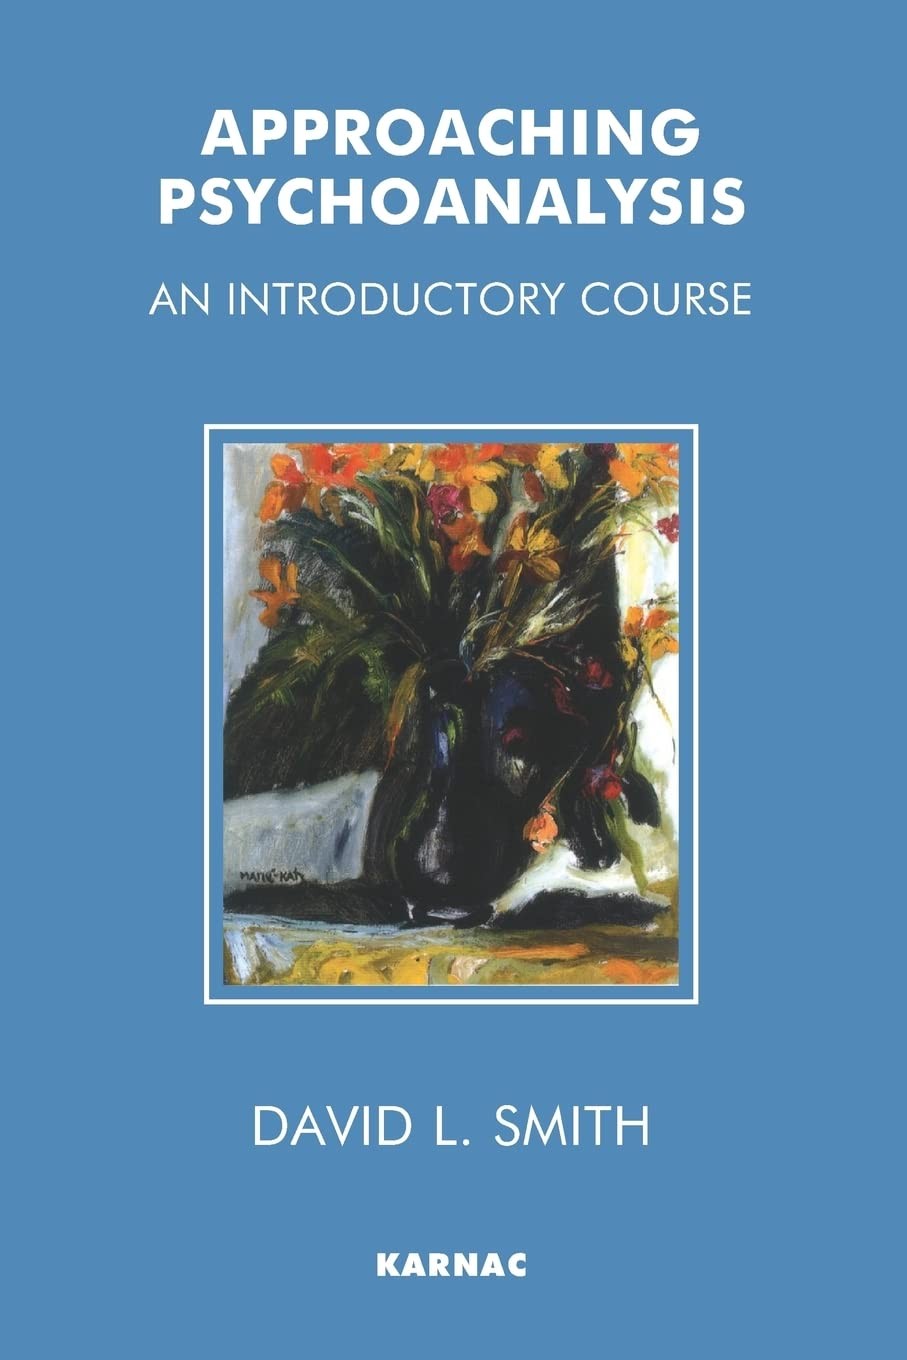 Approaching Psychoanalysis: An Introductory Course